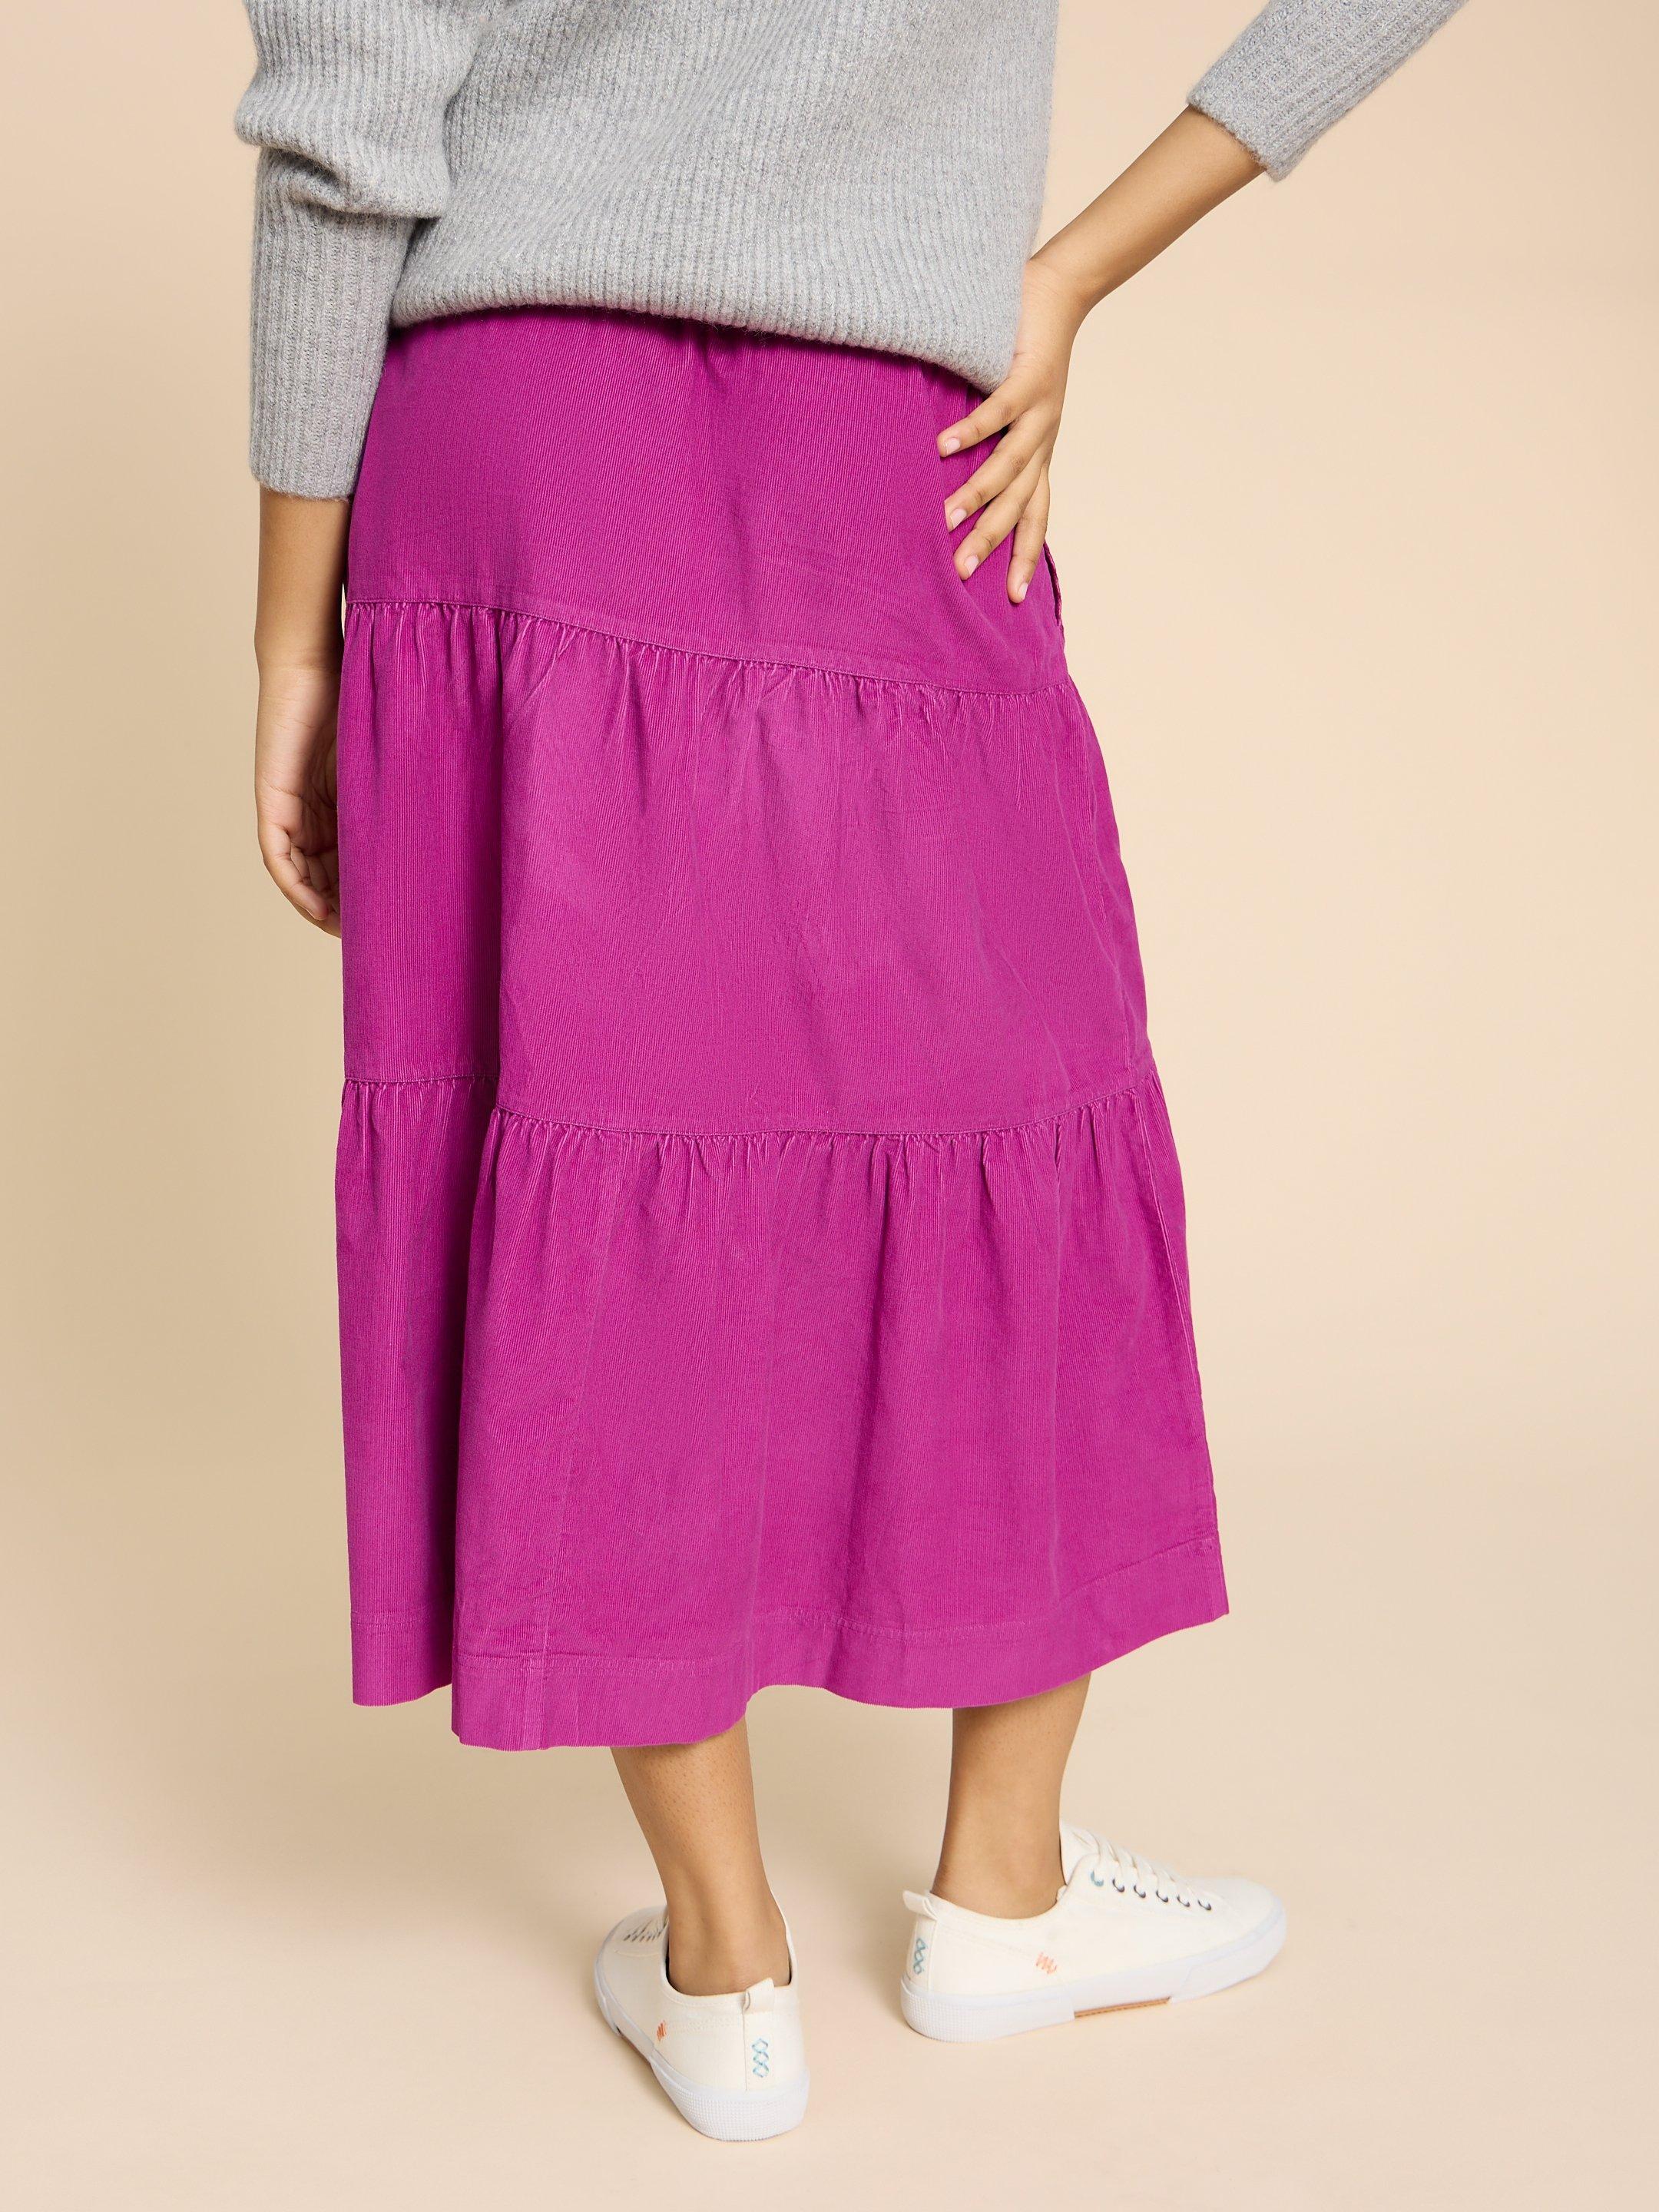 Jade Tiered Cord Skirt in BRIGHT PINK | White Stuff